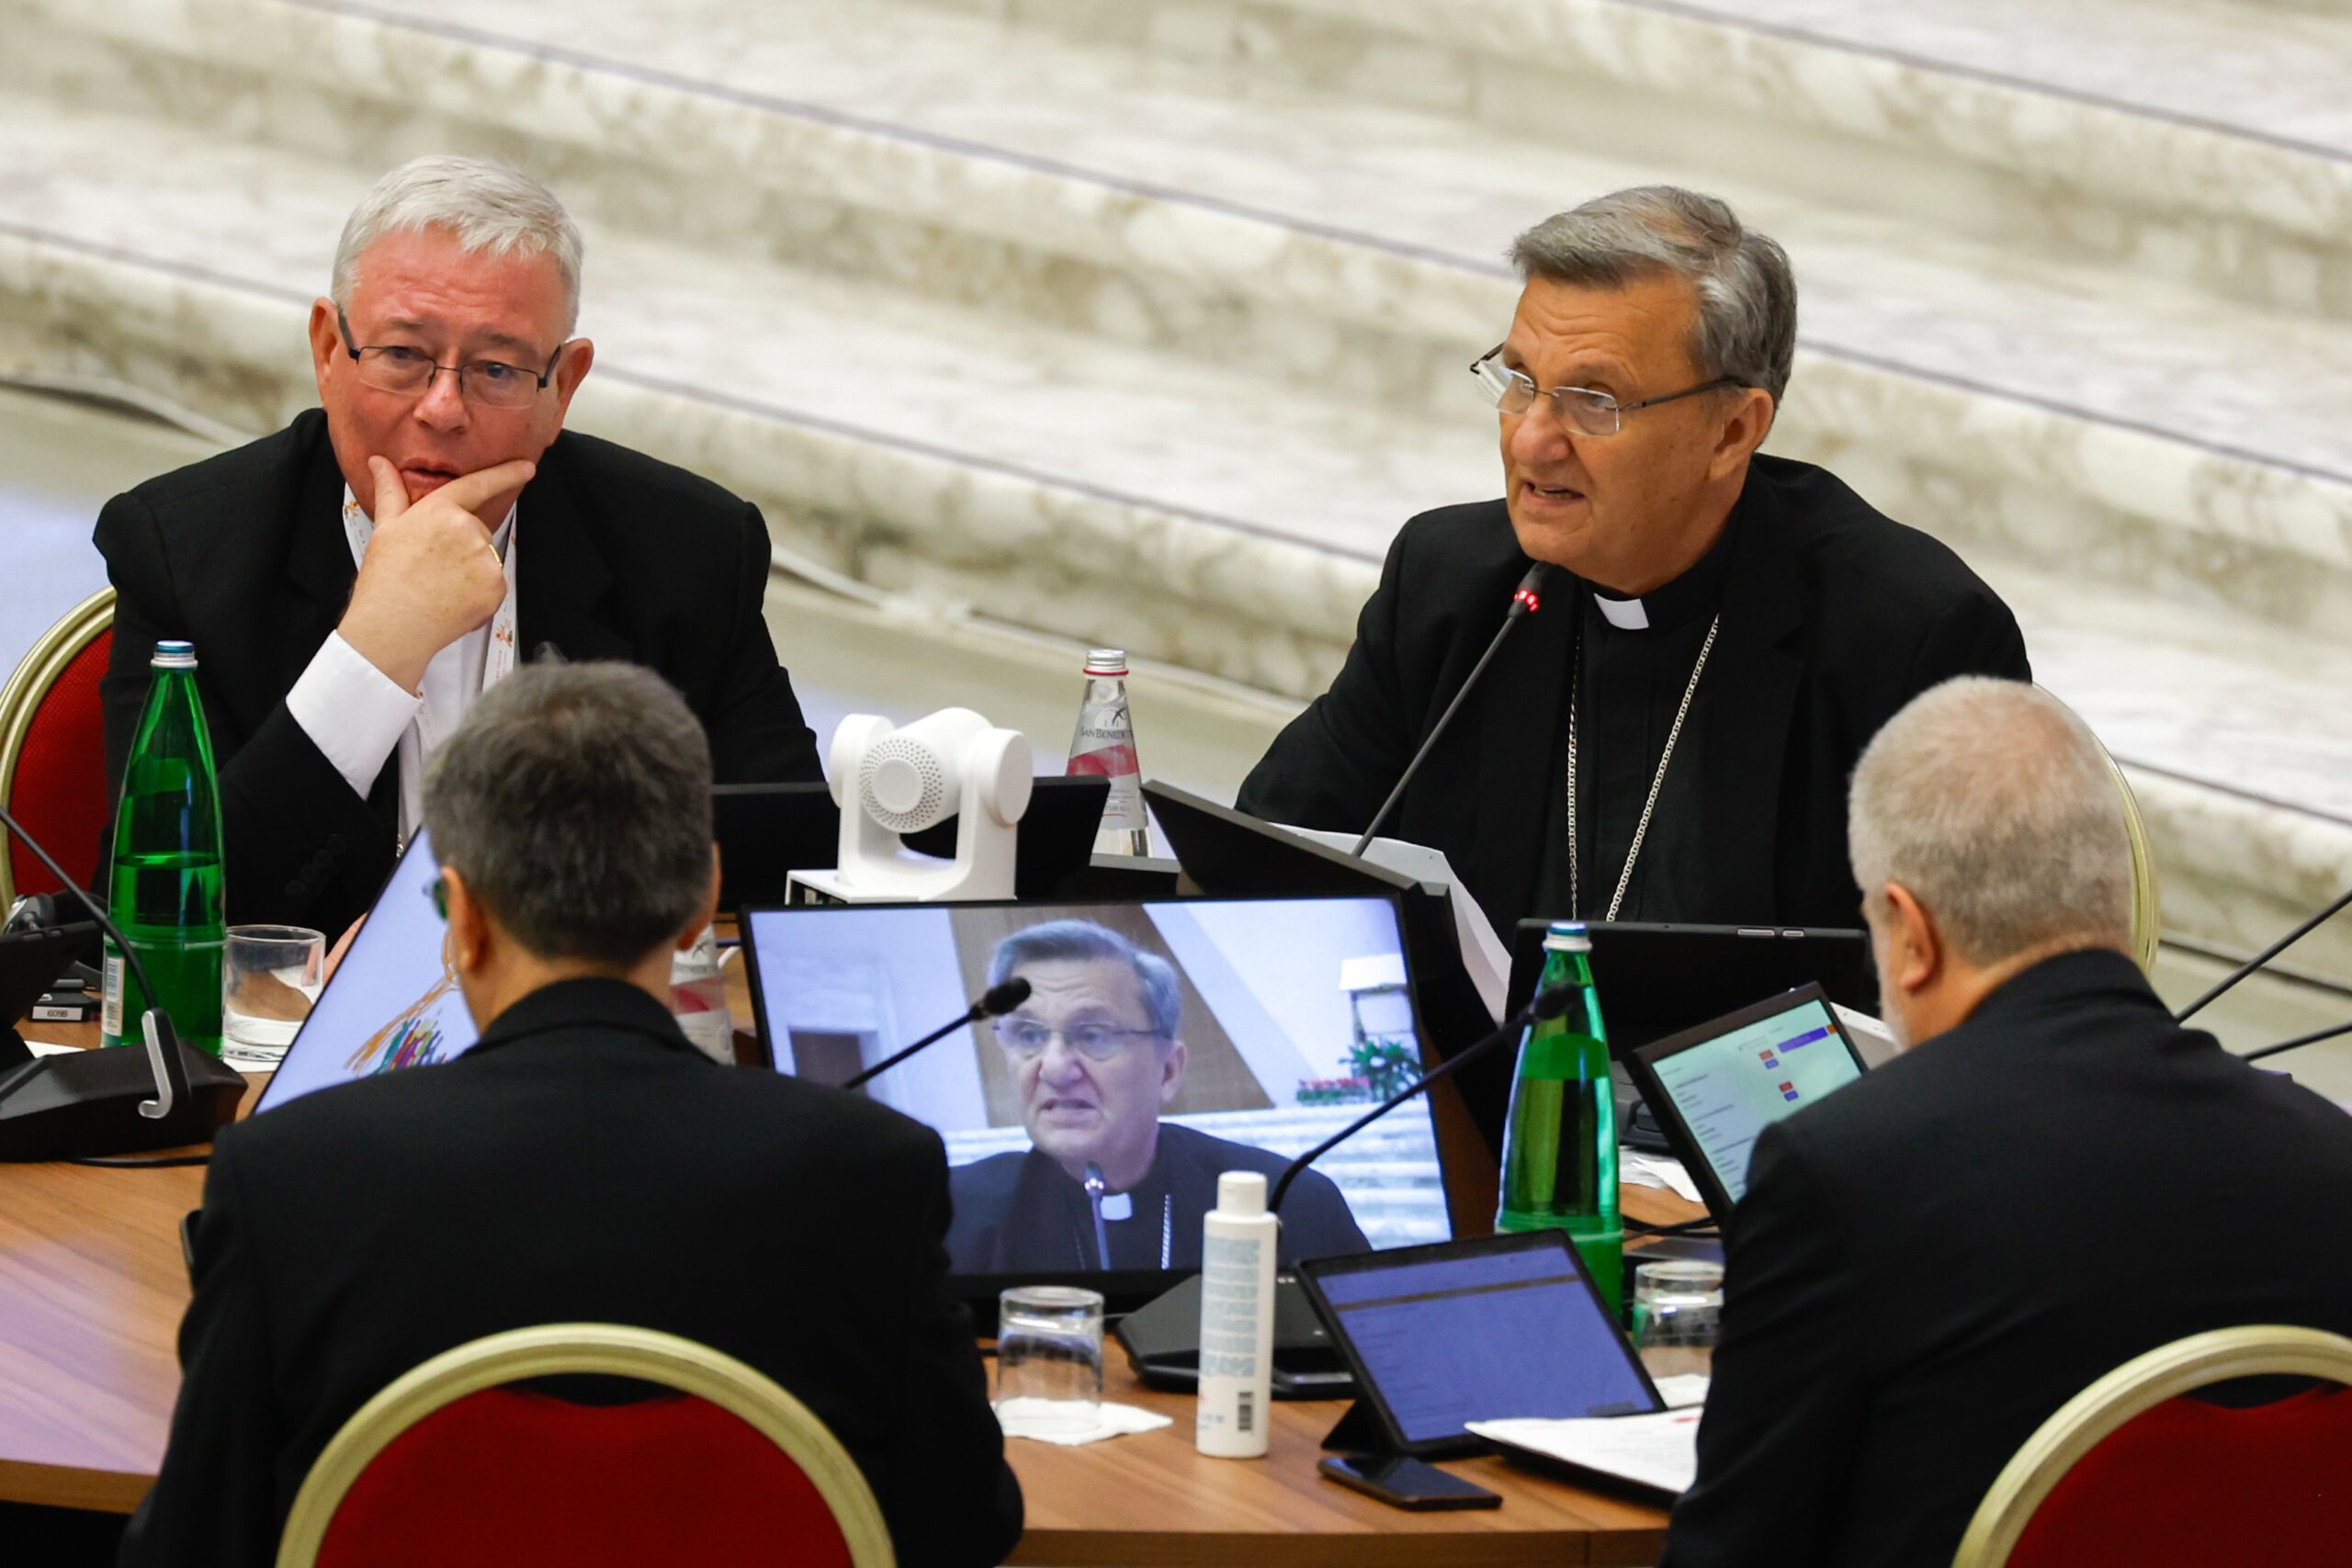 Cardinal Jean-Claude Hollerich, relator general of the synod, listens as Cardinal Mario Grech, secretary-general, introduces the beginning of the assembly of the Synod of Bishops' work in the Vatican's Paul VI Audience Hall Oct. 9, 2023. (CNS photo/Lola Gomez)